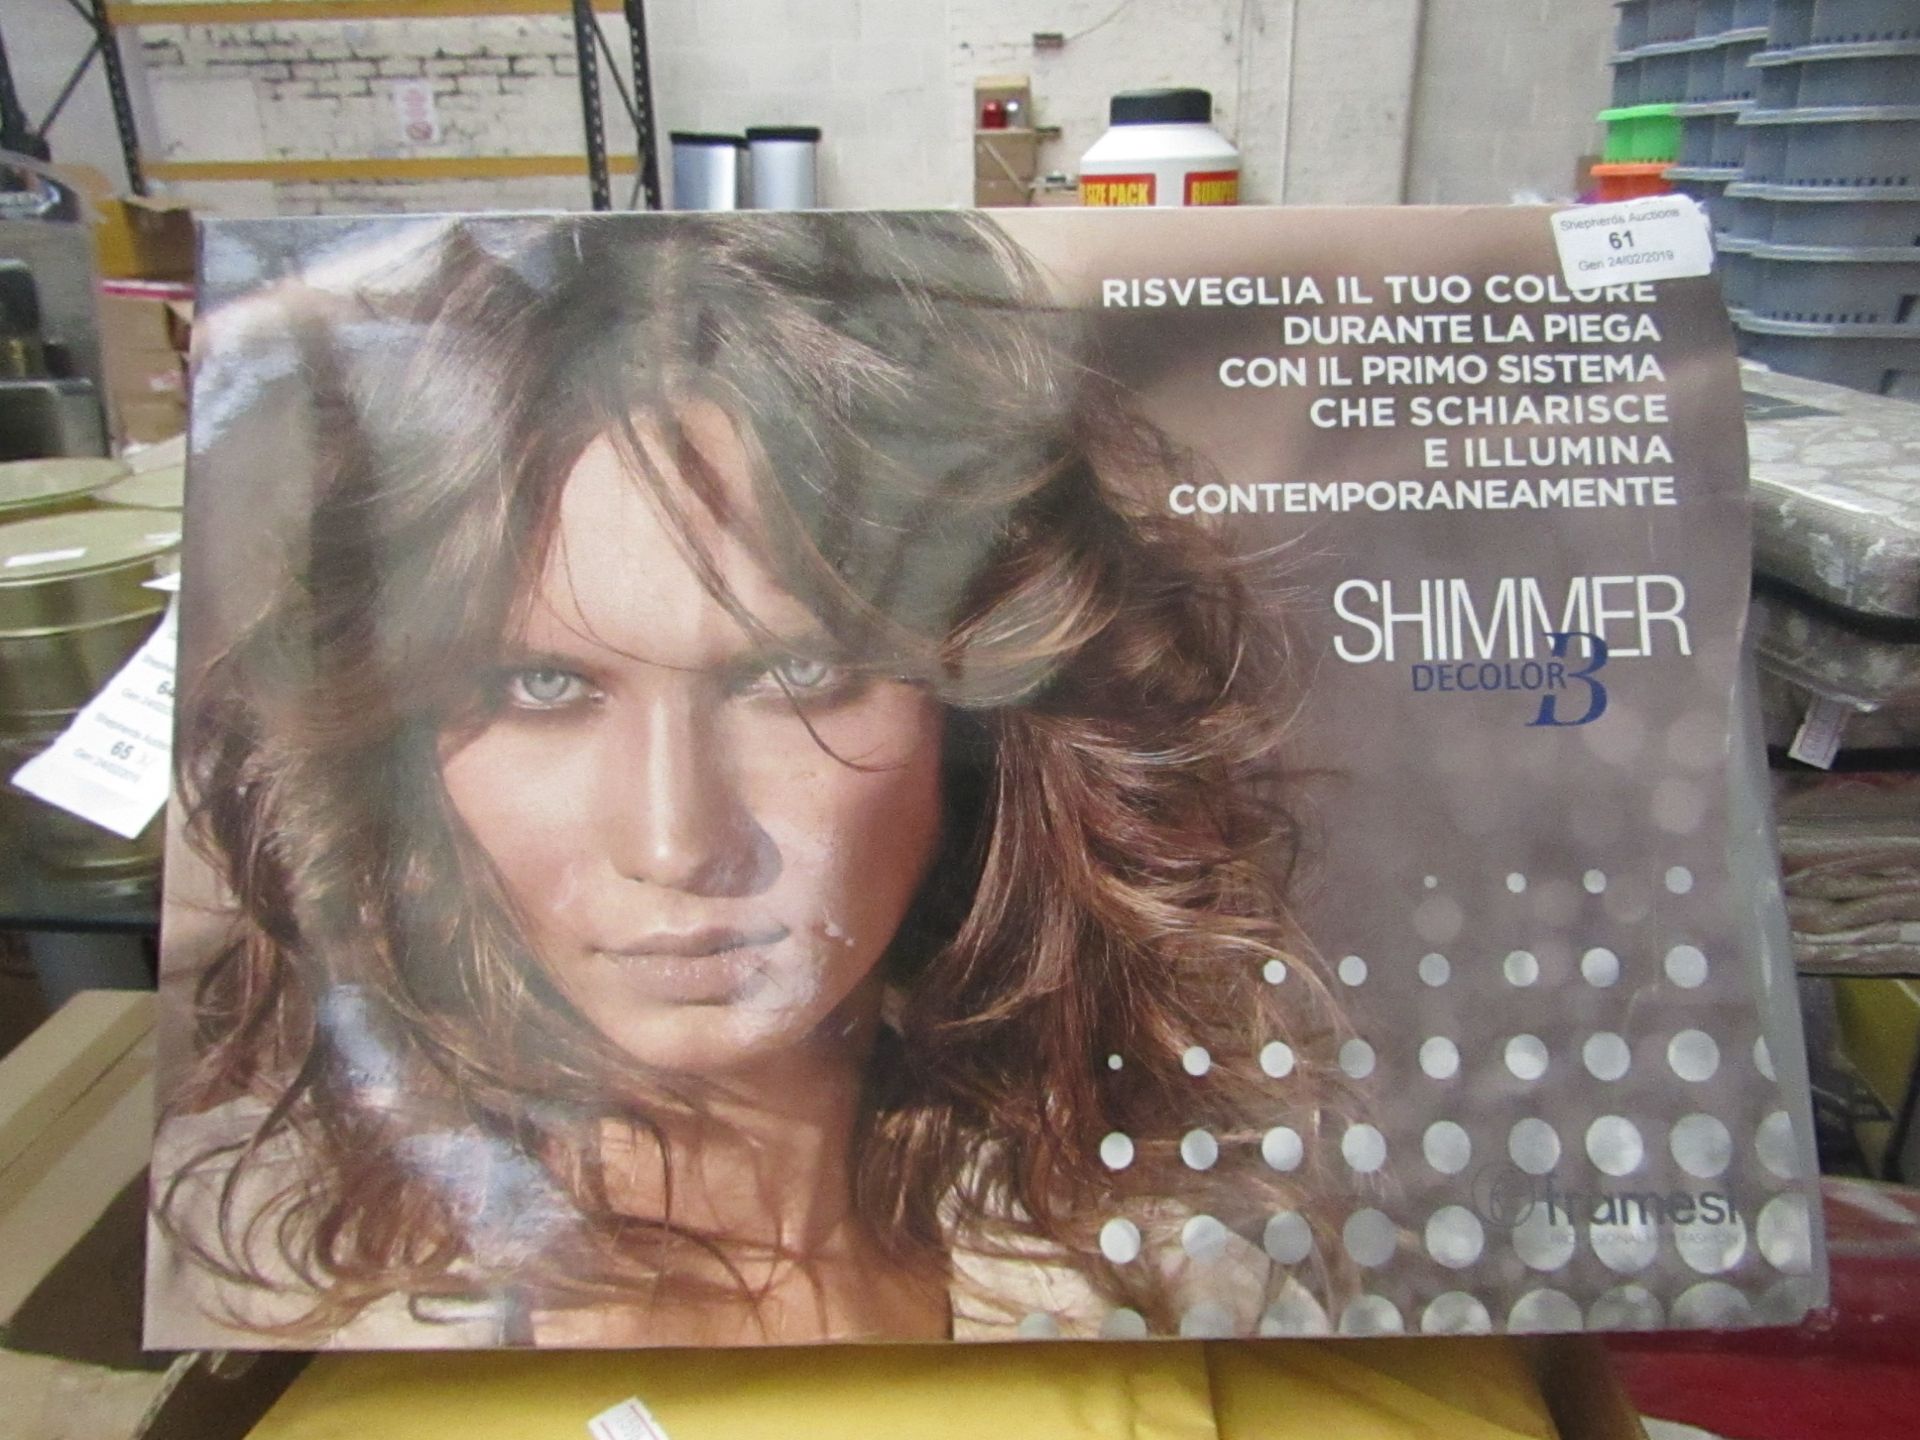 Shimmer Decolor professional hair fashion set , boxed and unchecked.